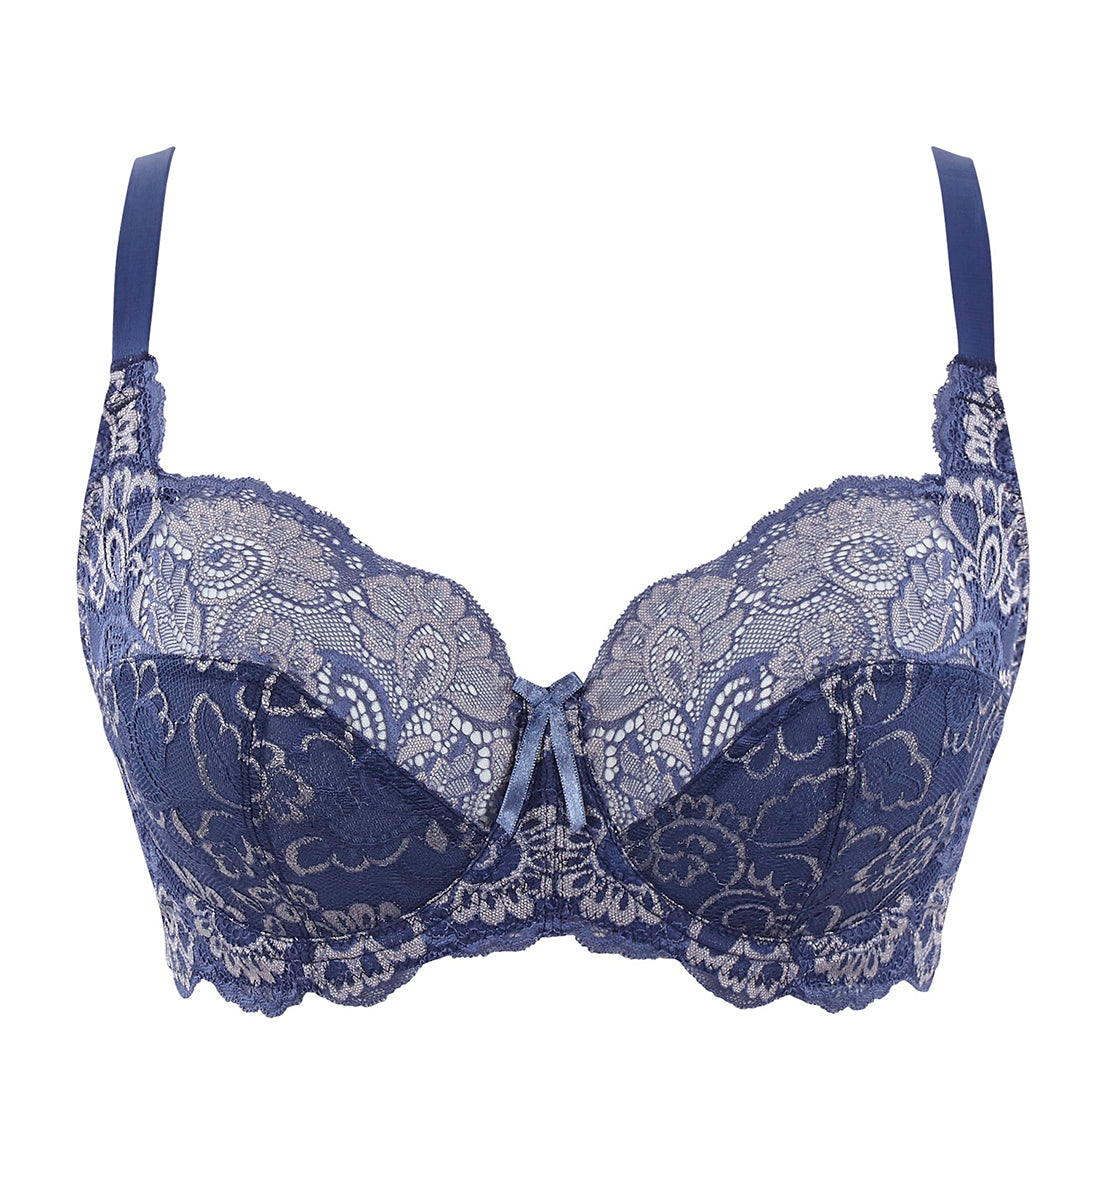 Panache Andorra Full Cup Underwire Bra (5675),30GG,Vintage Blue at   Women's Clothing store